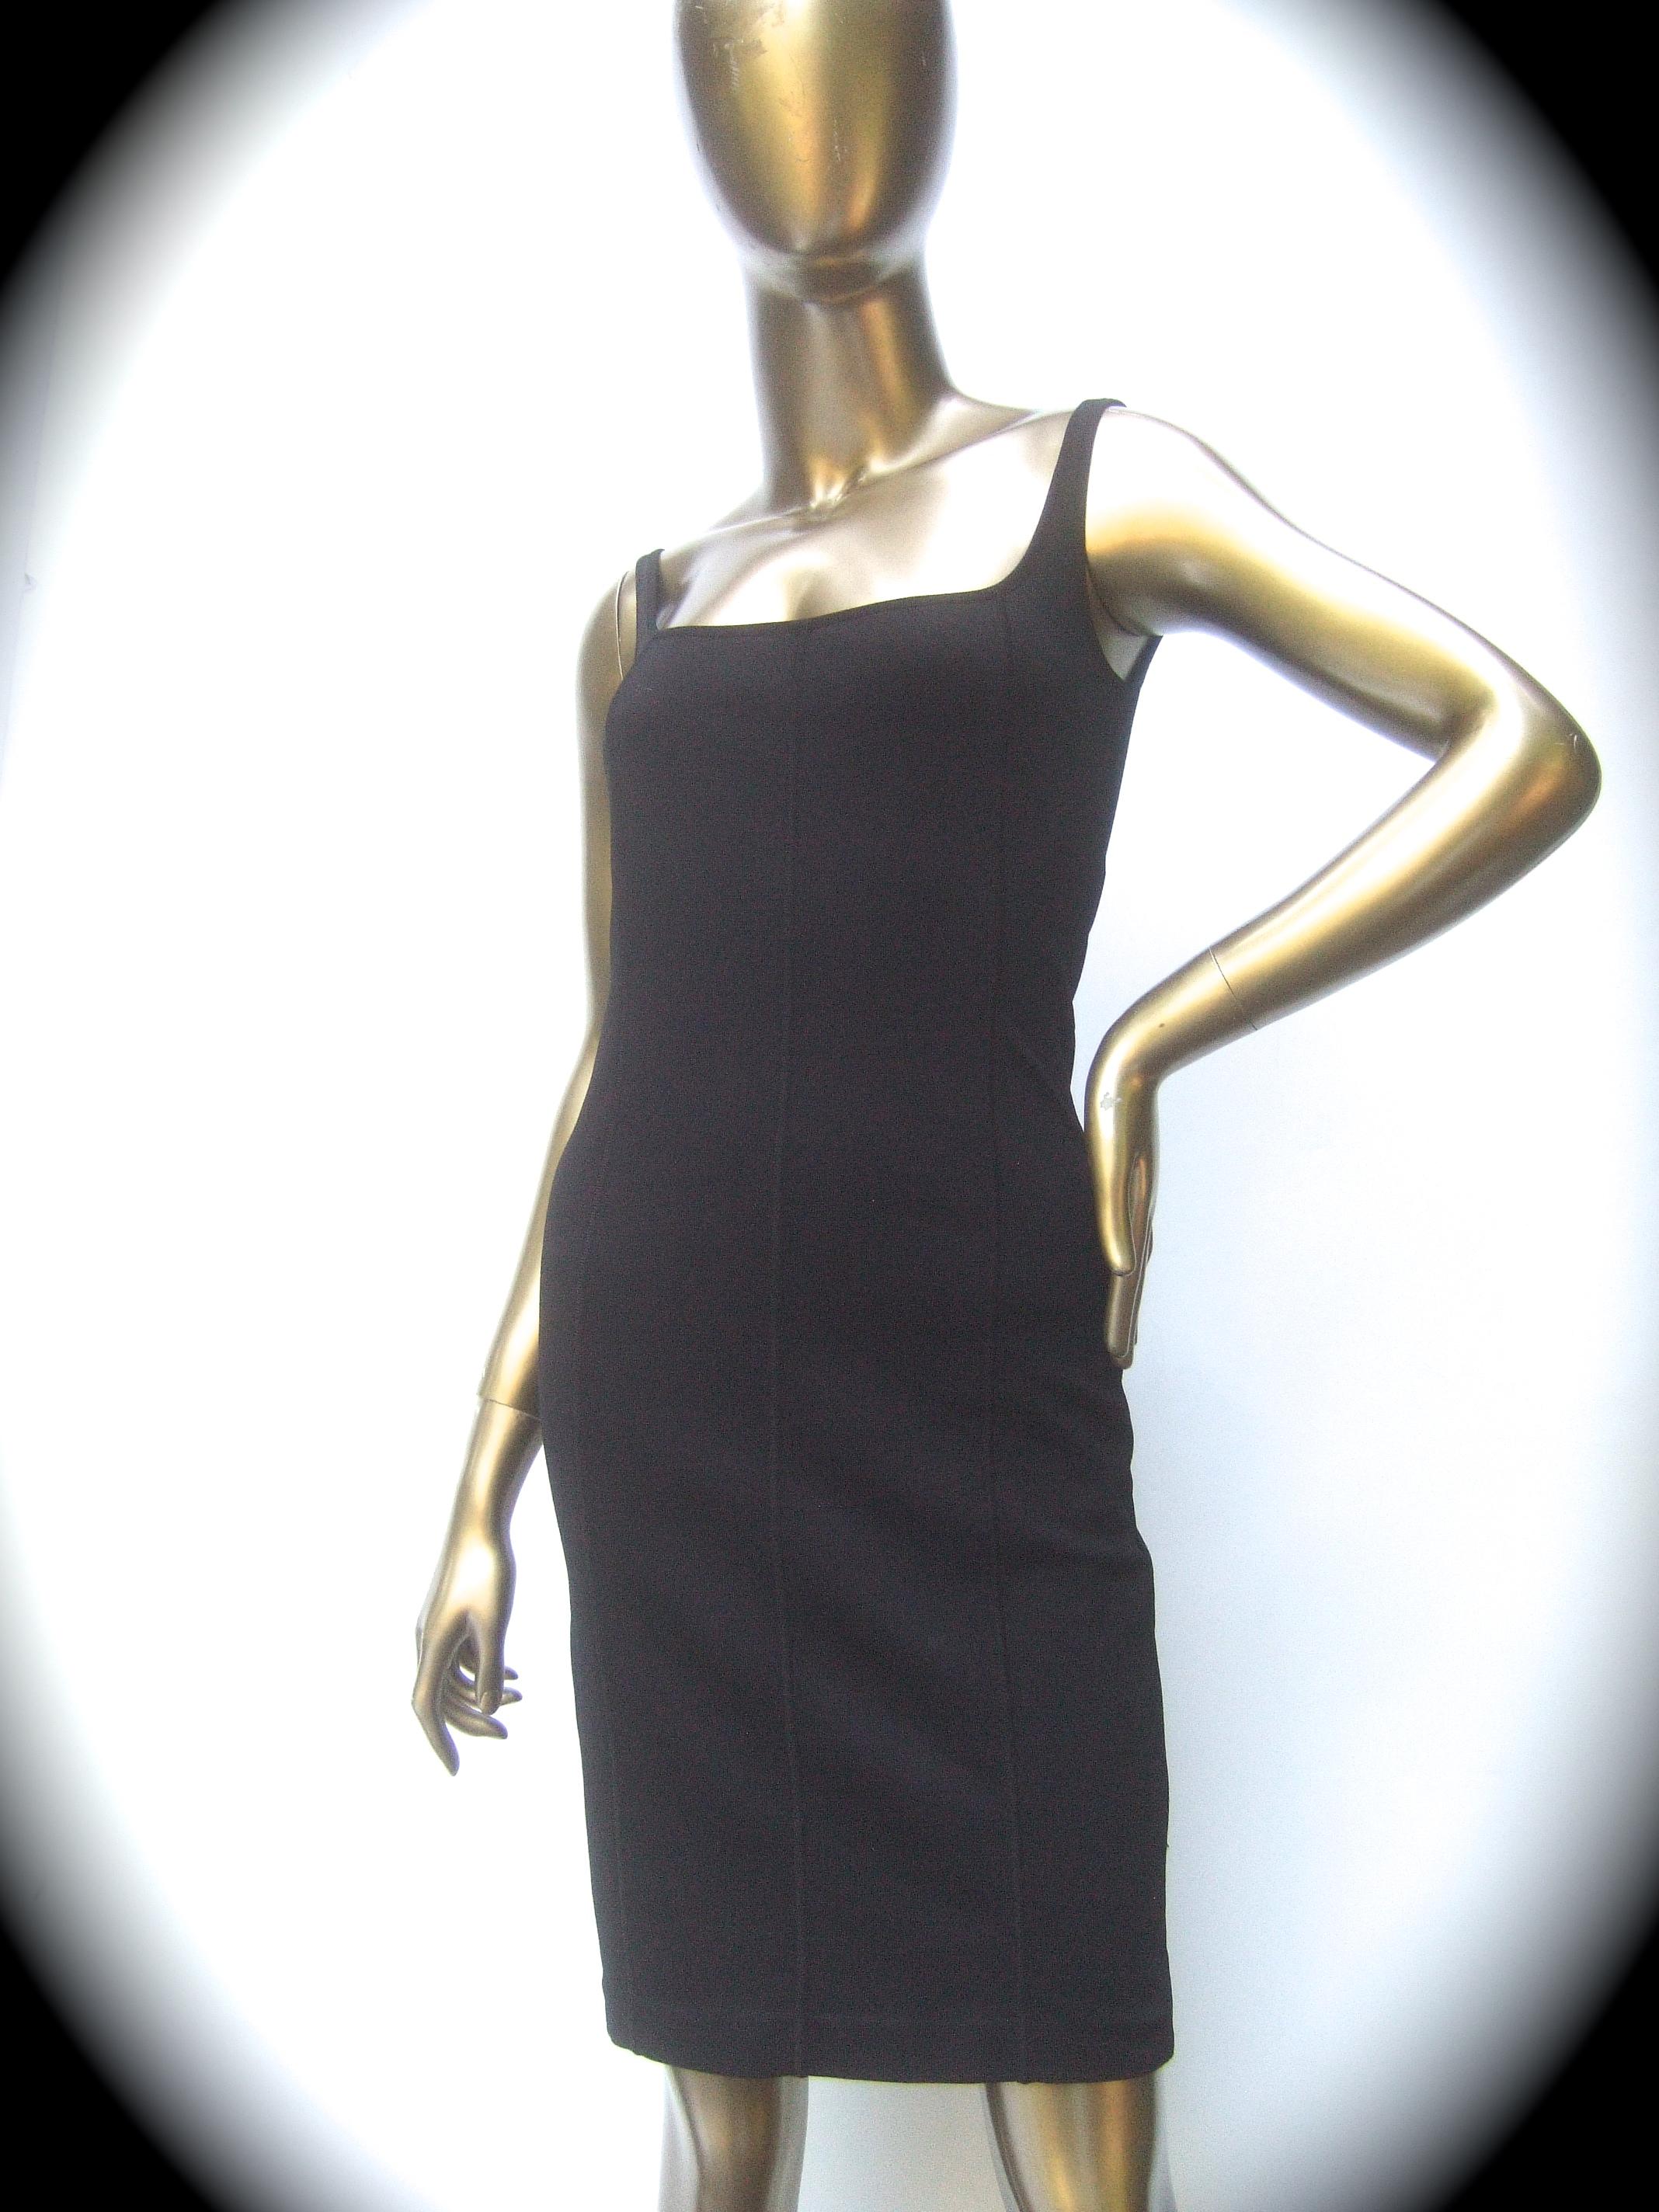 Gucci Italy Chic black stretch knit tank dress Tom Ford era c 1990s
The stylish knit dress contours and clings around the body
Accented with subtle vertical seams 4 inches apart throughout  
The dress is designed with a partial cutout back

The